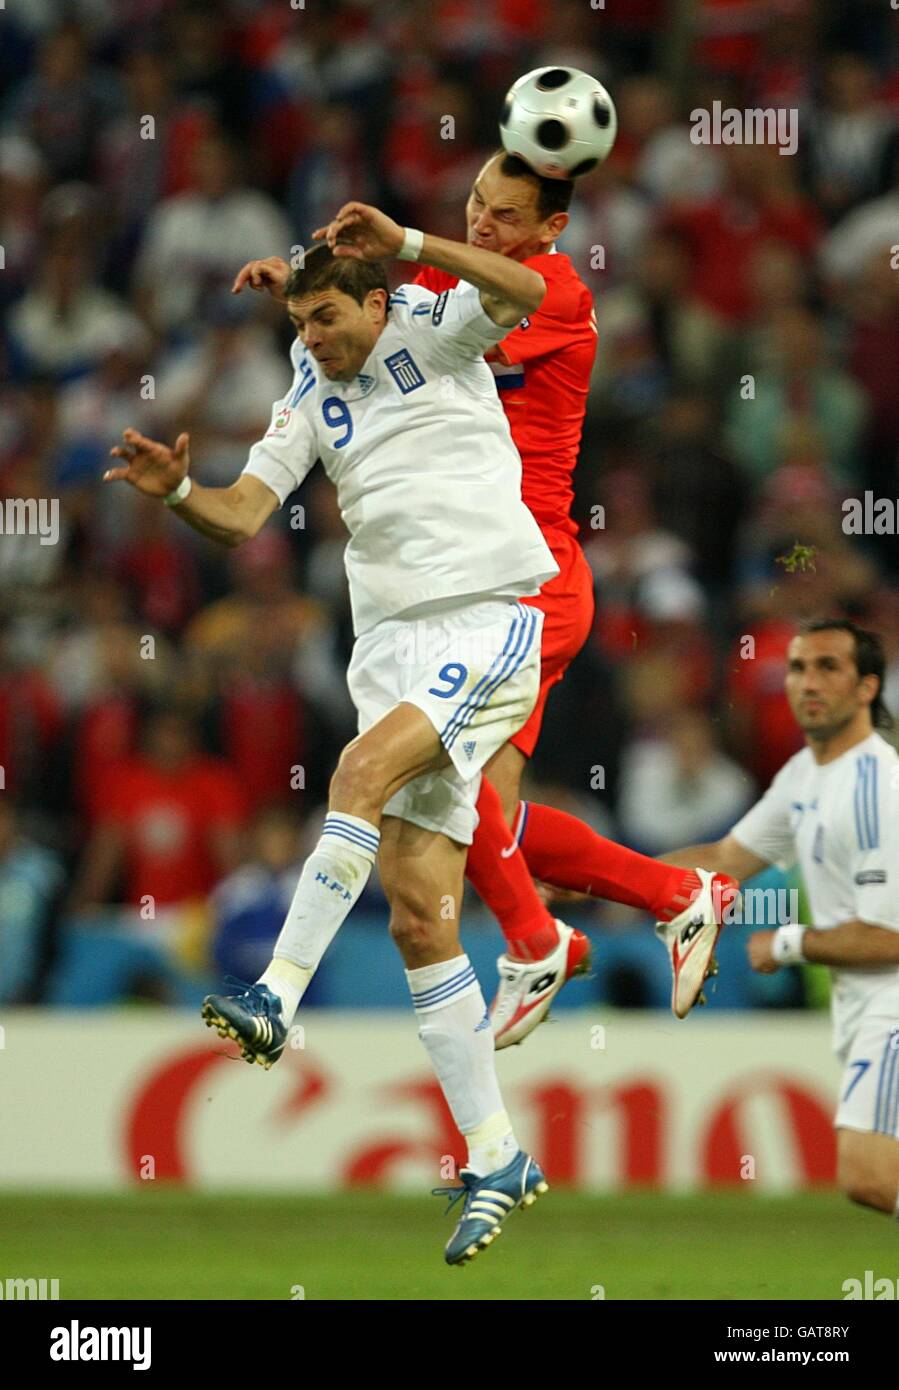 Soccer - UEFA European Championship 2008 - Group D - Greece v Russia - Wals Siezenheim Stadium. Greece's Angelos Charisteas (left) and Russia's Sergei Ignashevich battle for the ball in the air. Stock Photo